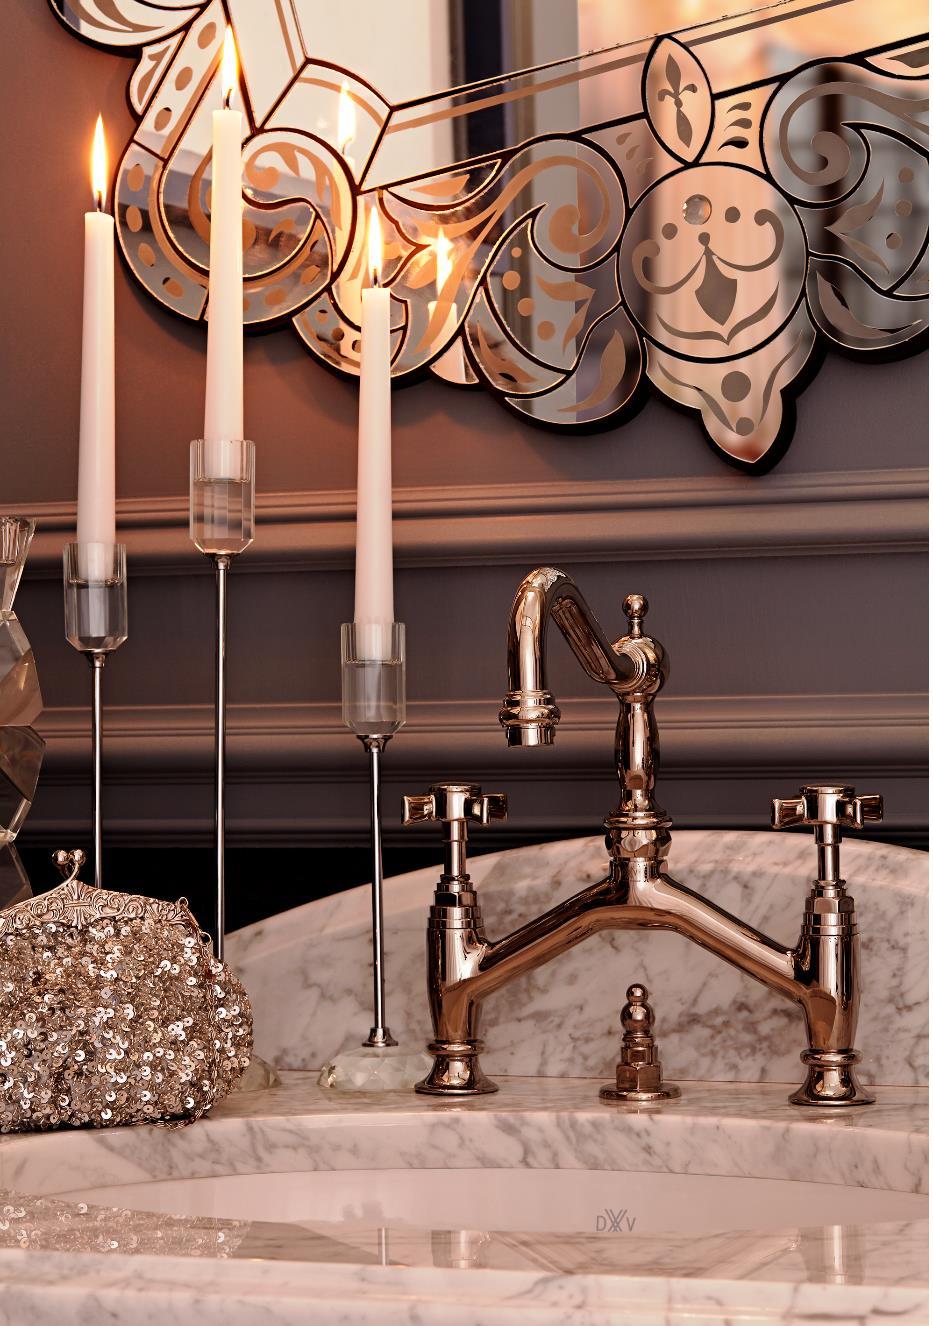 The DXV Landfair Bridge Faucet with Cross Handles in a platinum nickel finish stands magnificently above